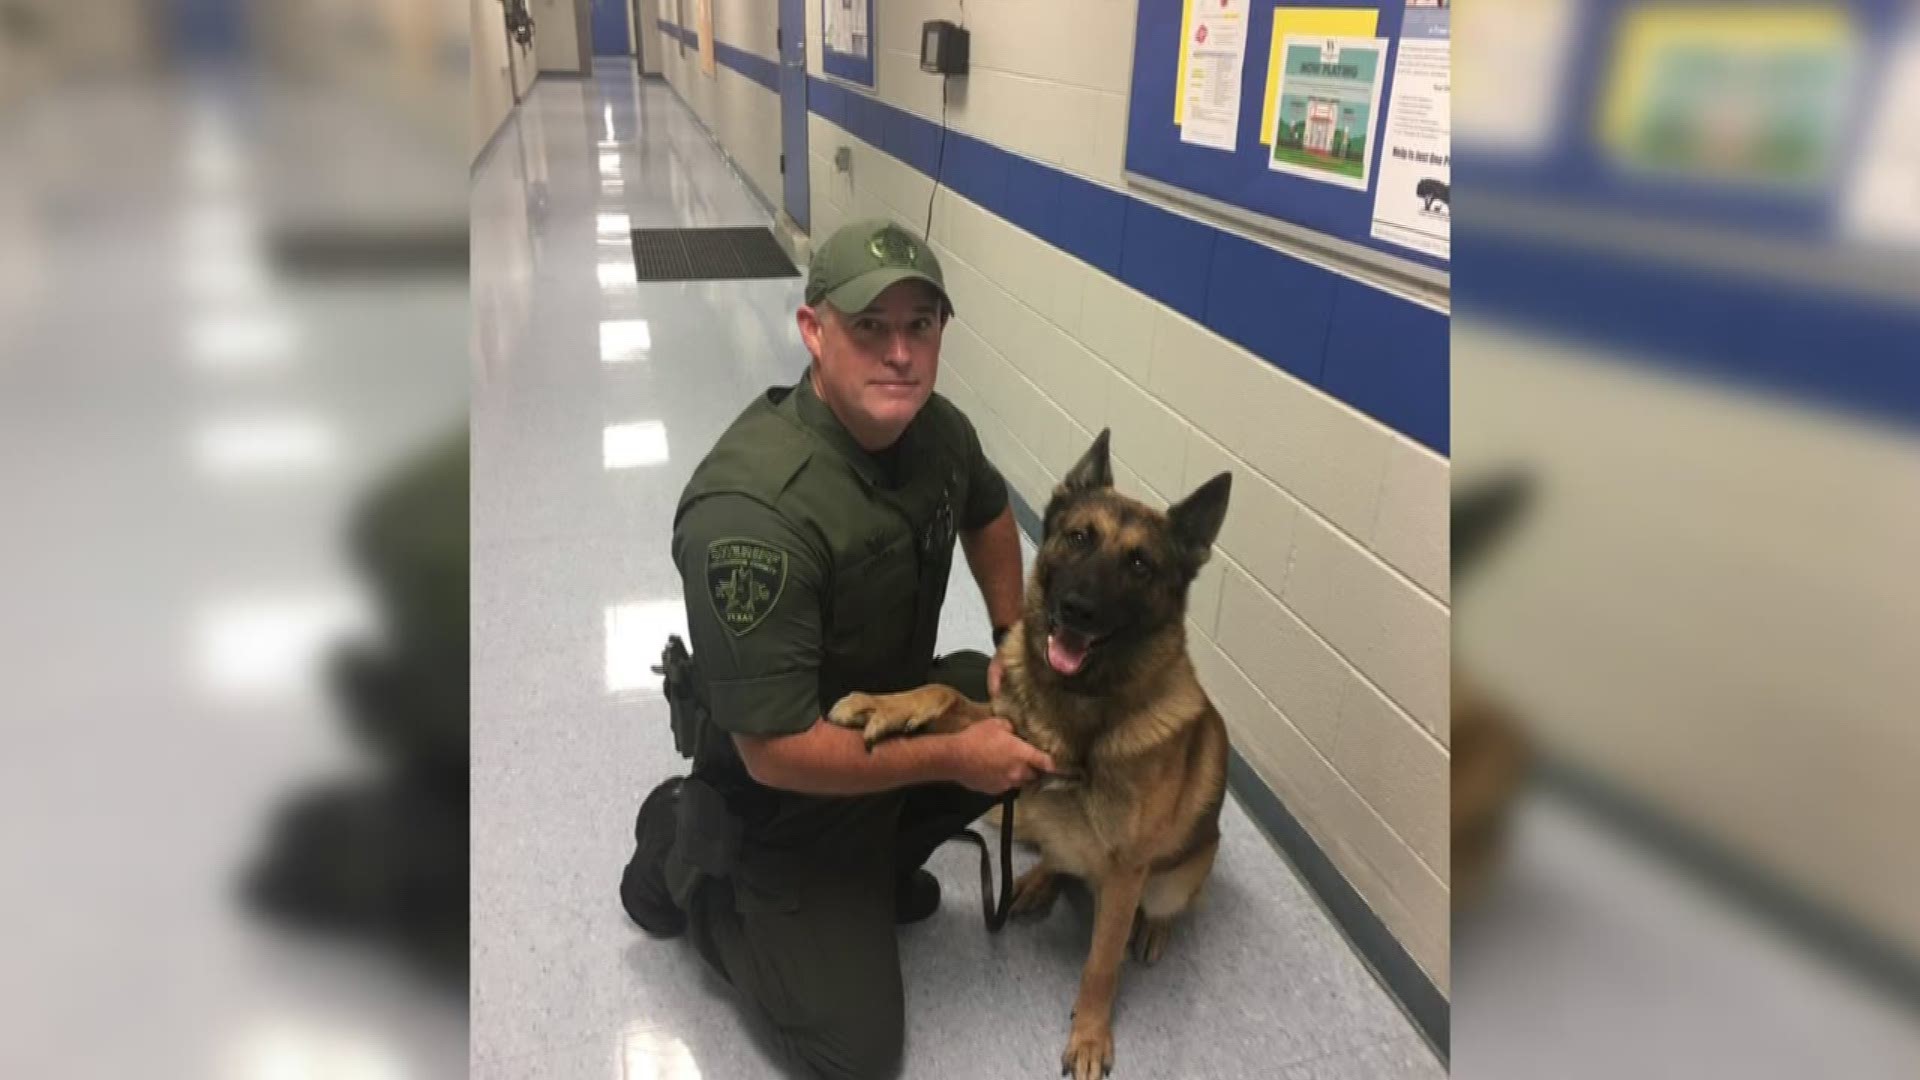 Williamson County Sheriff Robert Chody said Wednesday morning that a nonprofit will provide them with seven armored vests for K-9 officers.